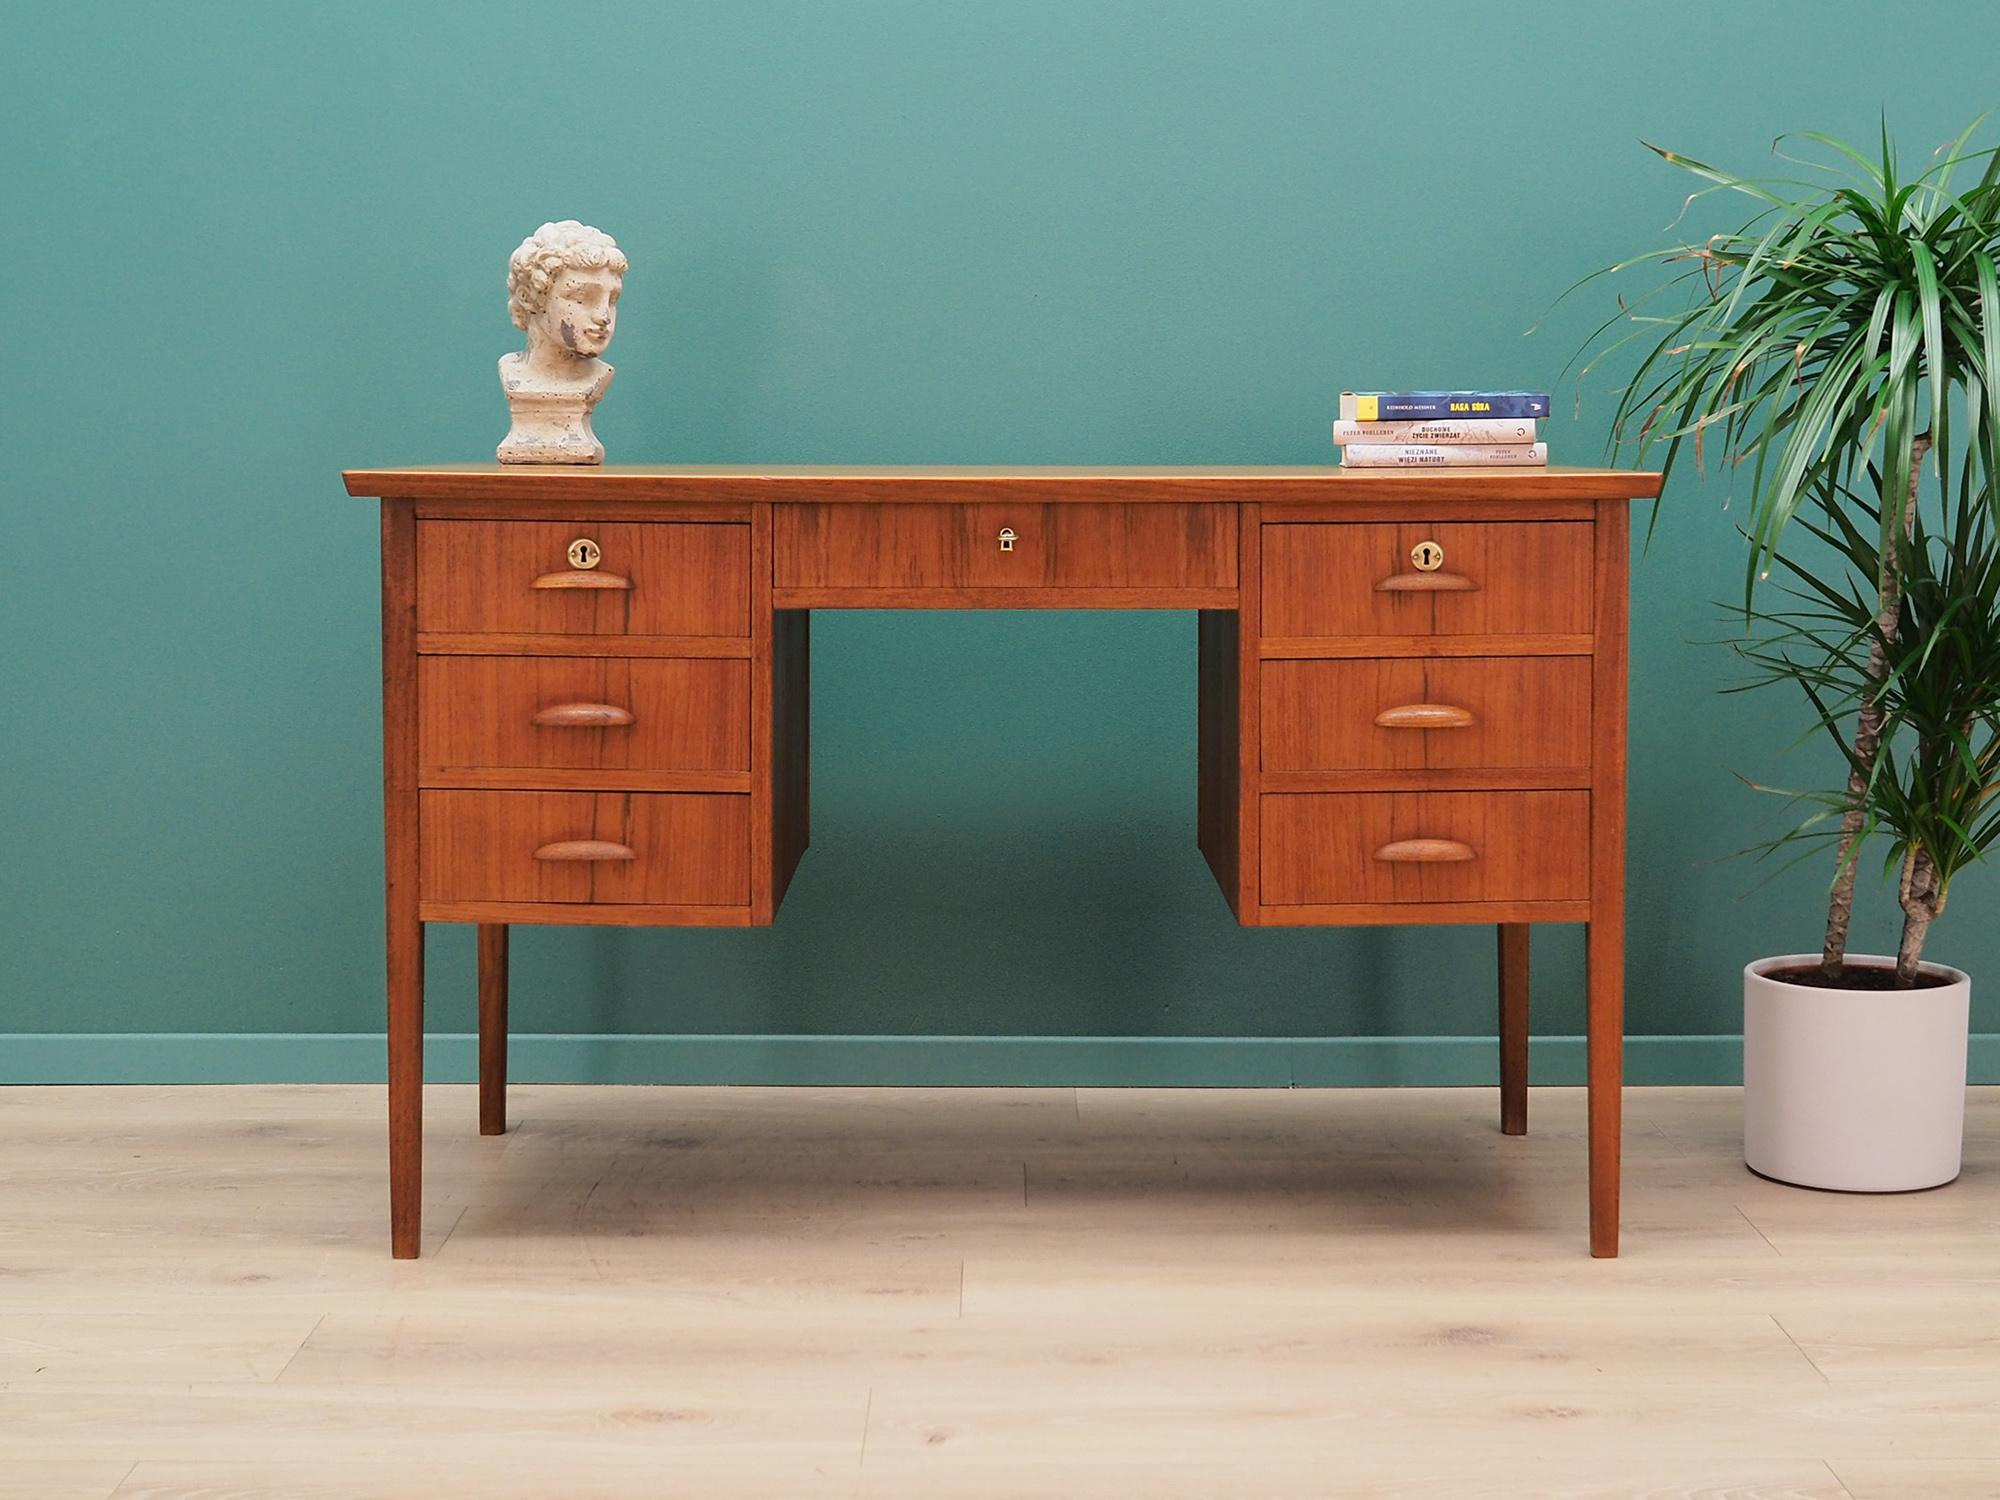 Desk made in the 1960s, Danish production.

Structure and top are covered with teak veneer. Legs are made of solid teak wood, perfectly integrated into the structure of the desk. Surface after refreshing. Front of the desk has seven drawers. It